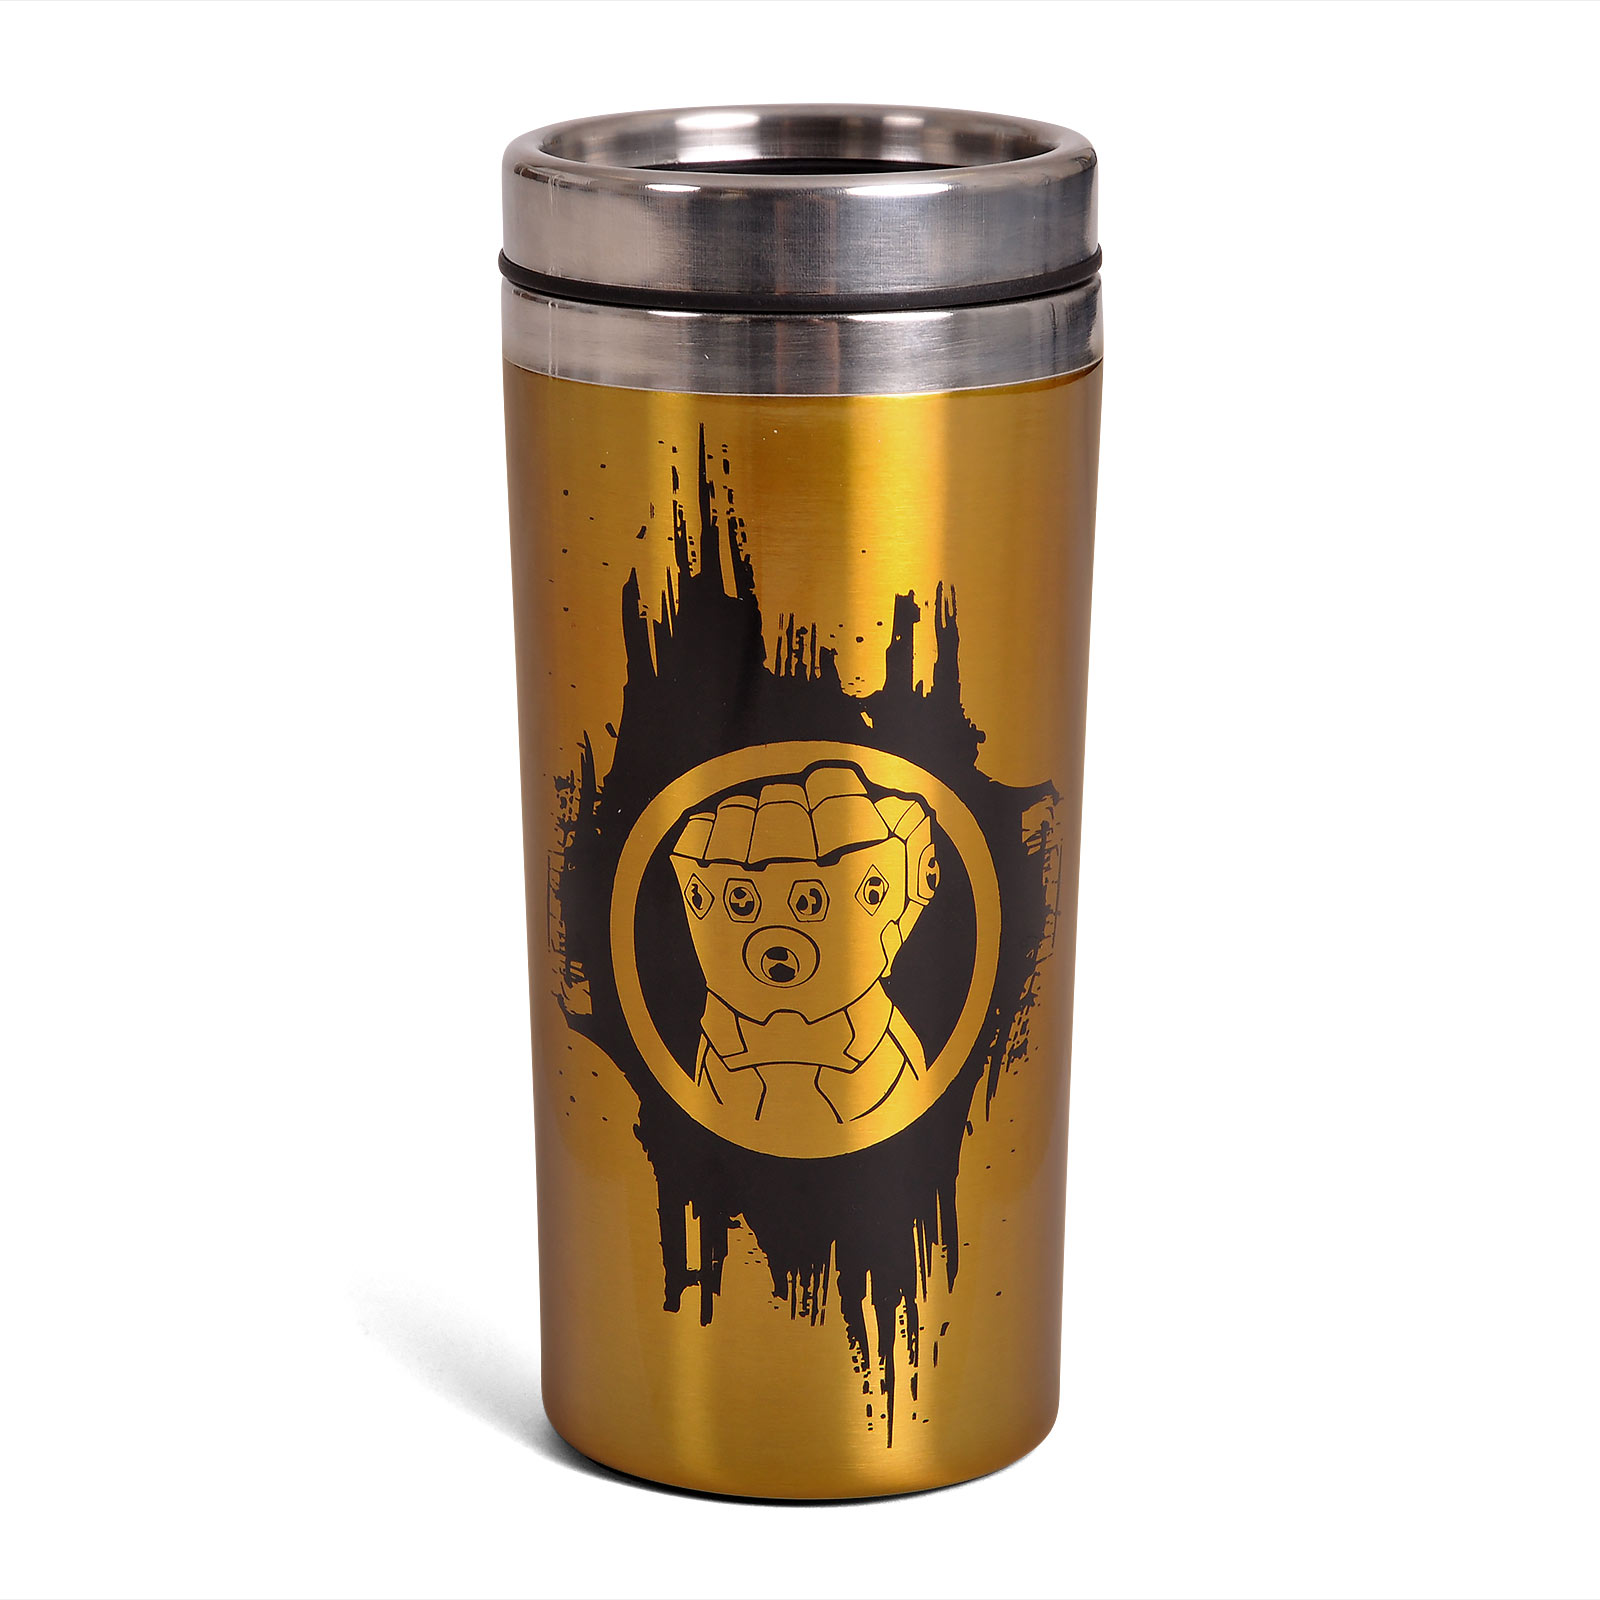 Avengers - Thanos Infinity Gauntlet To Go Cup